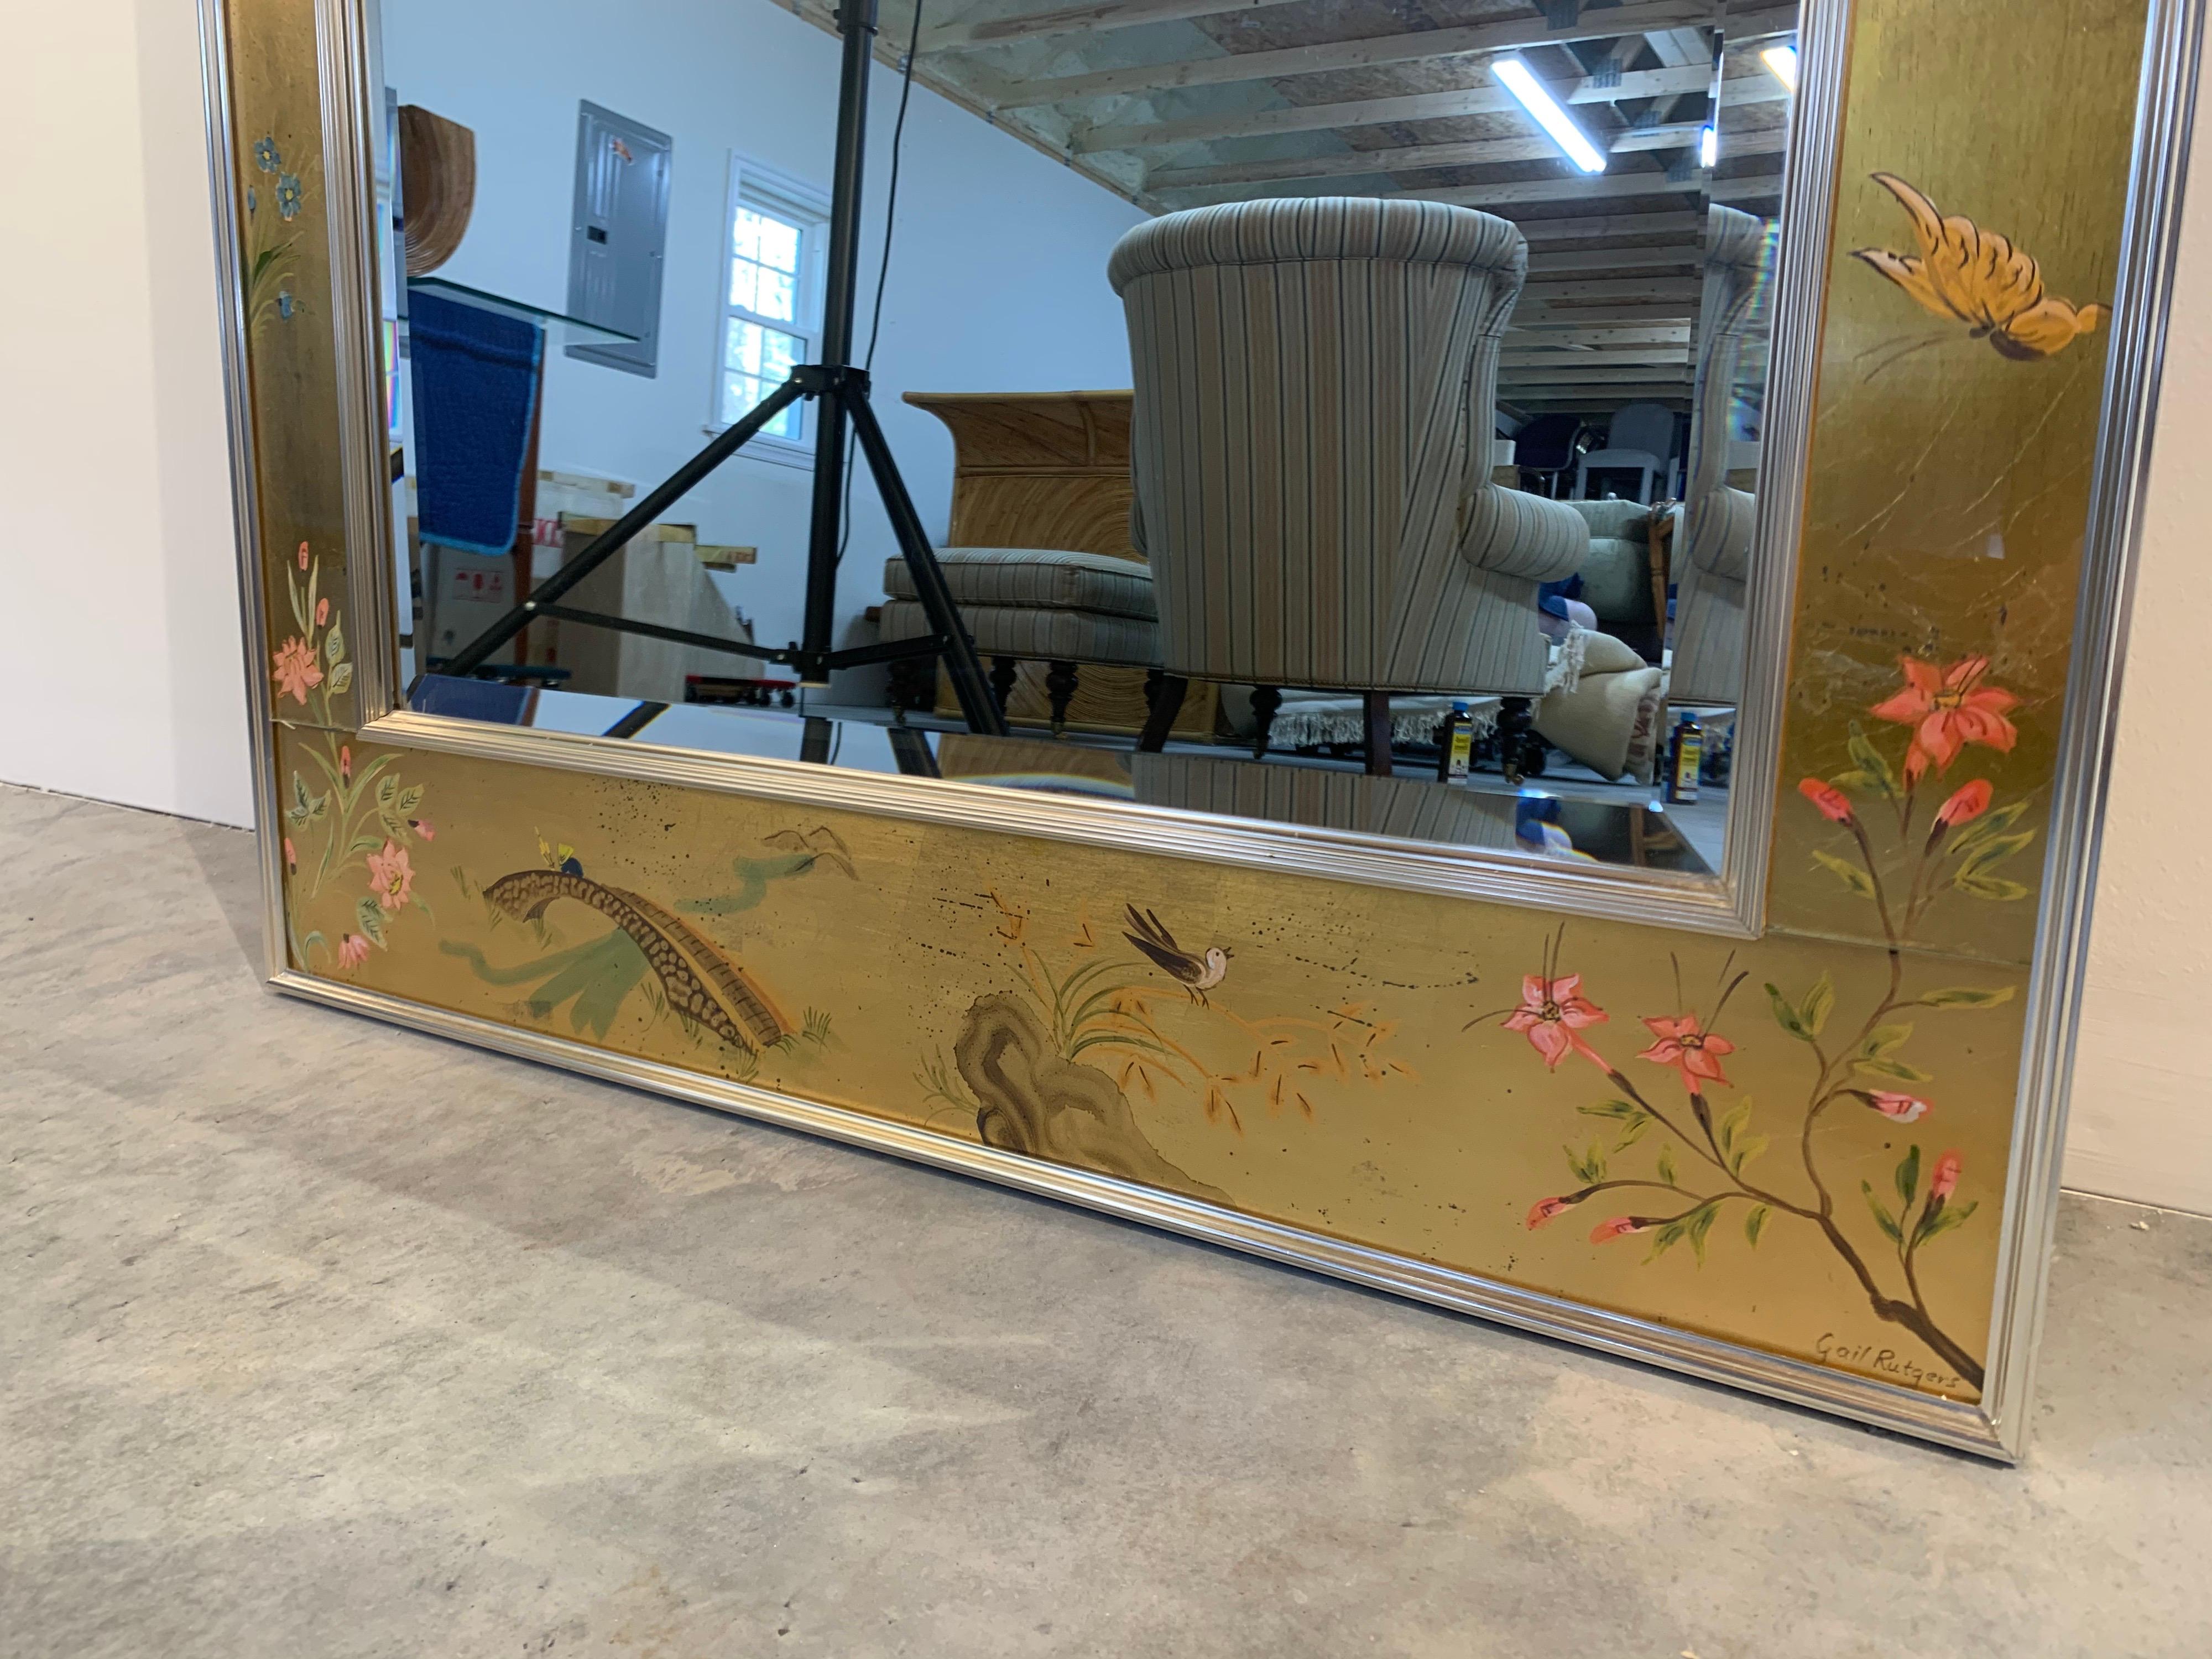 An exquisite Labarge Chinese/Asian chinoiserie style mirror. Outstanding quality, gold leaf overlay on reverse painted glass. The mirror is beveled.

Hand painted and signed by the artist 'Gail Rutgers', who we know was painting for Labarge, since